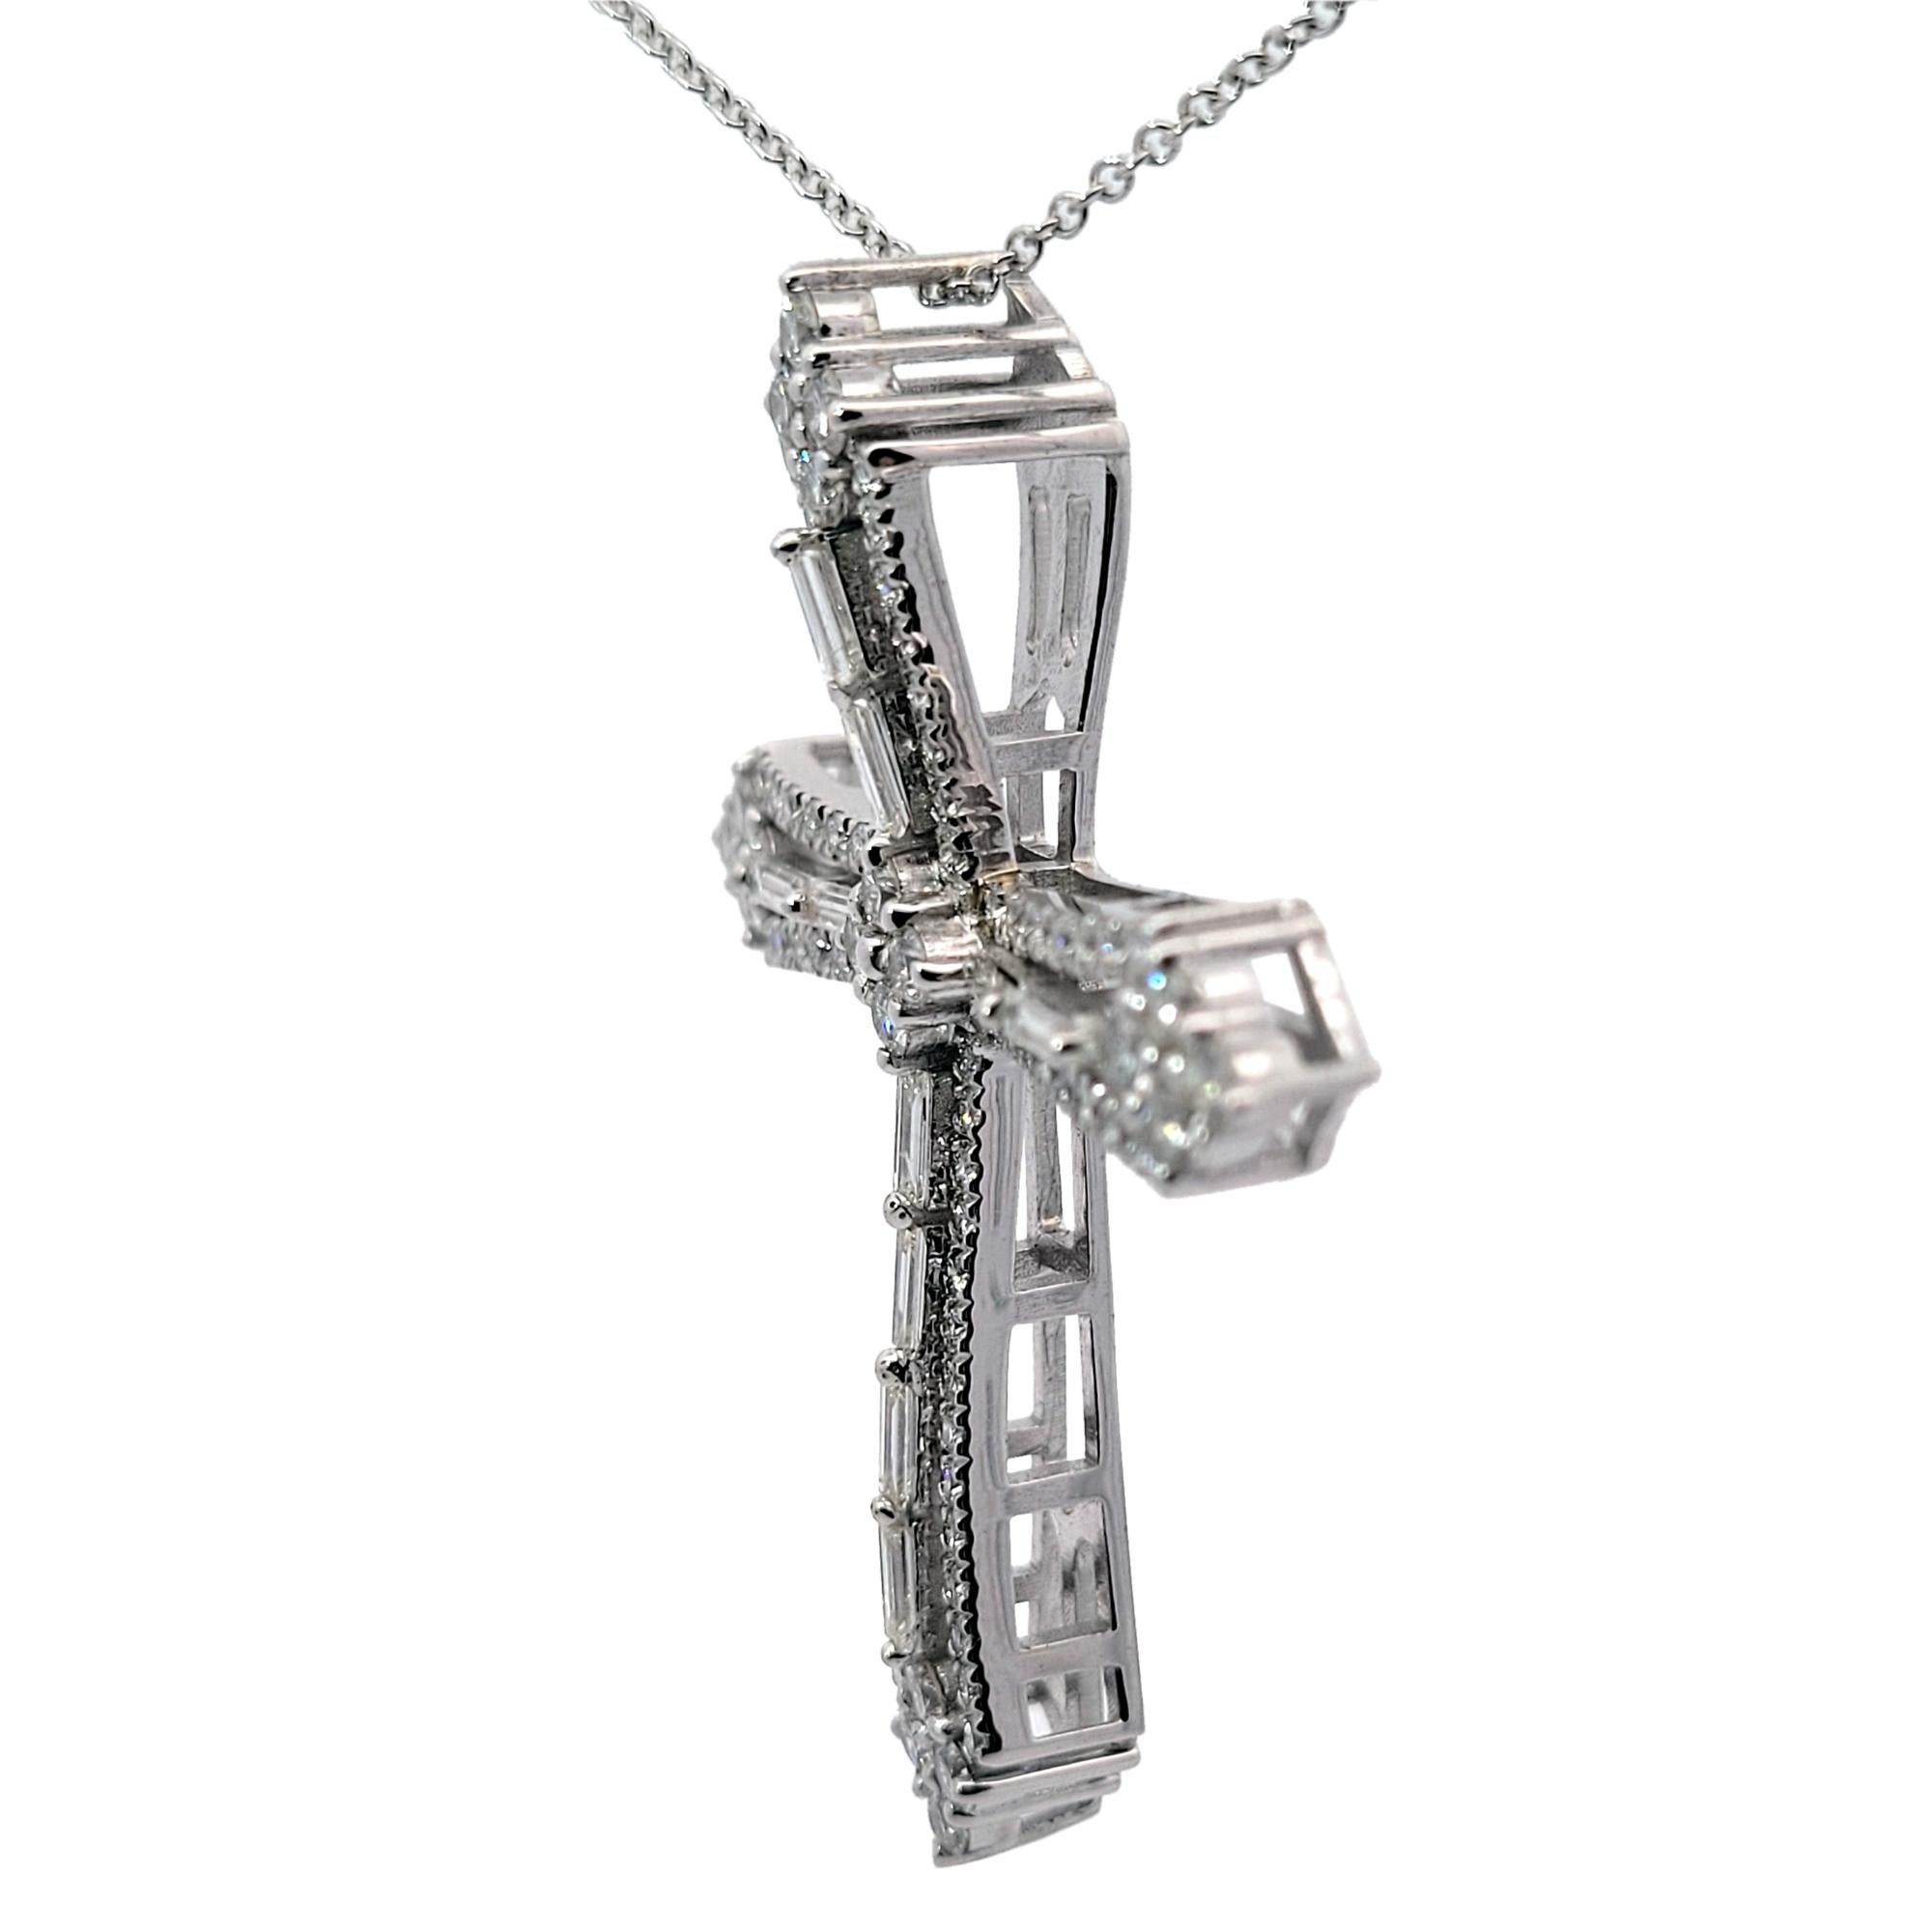 14K Gold Beautiful Cross Pendant with 10 perfectly matched Baguette  and 96 Round Brilliant Diamonds with total weight of 2.42 Ct .
Size 38 mm x 48 mm .
Metal: 14K White Gold 9.9 gr.
Round diamonds: 20x2.3 mm Prong Set, 76 1.35 mm Micro Pave